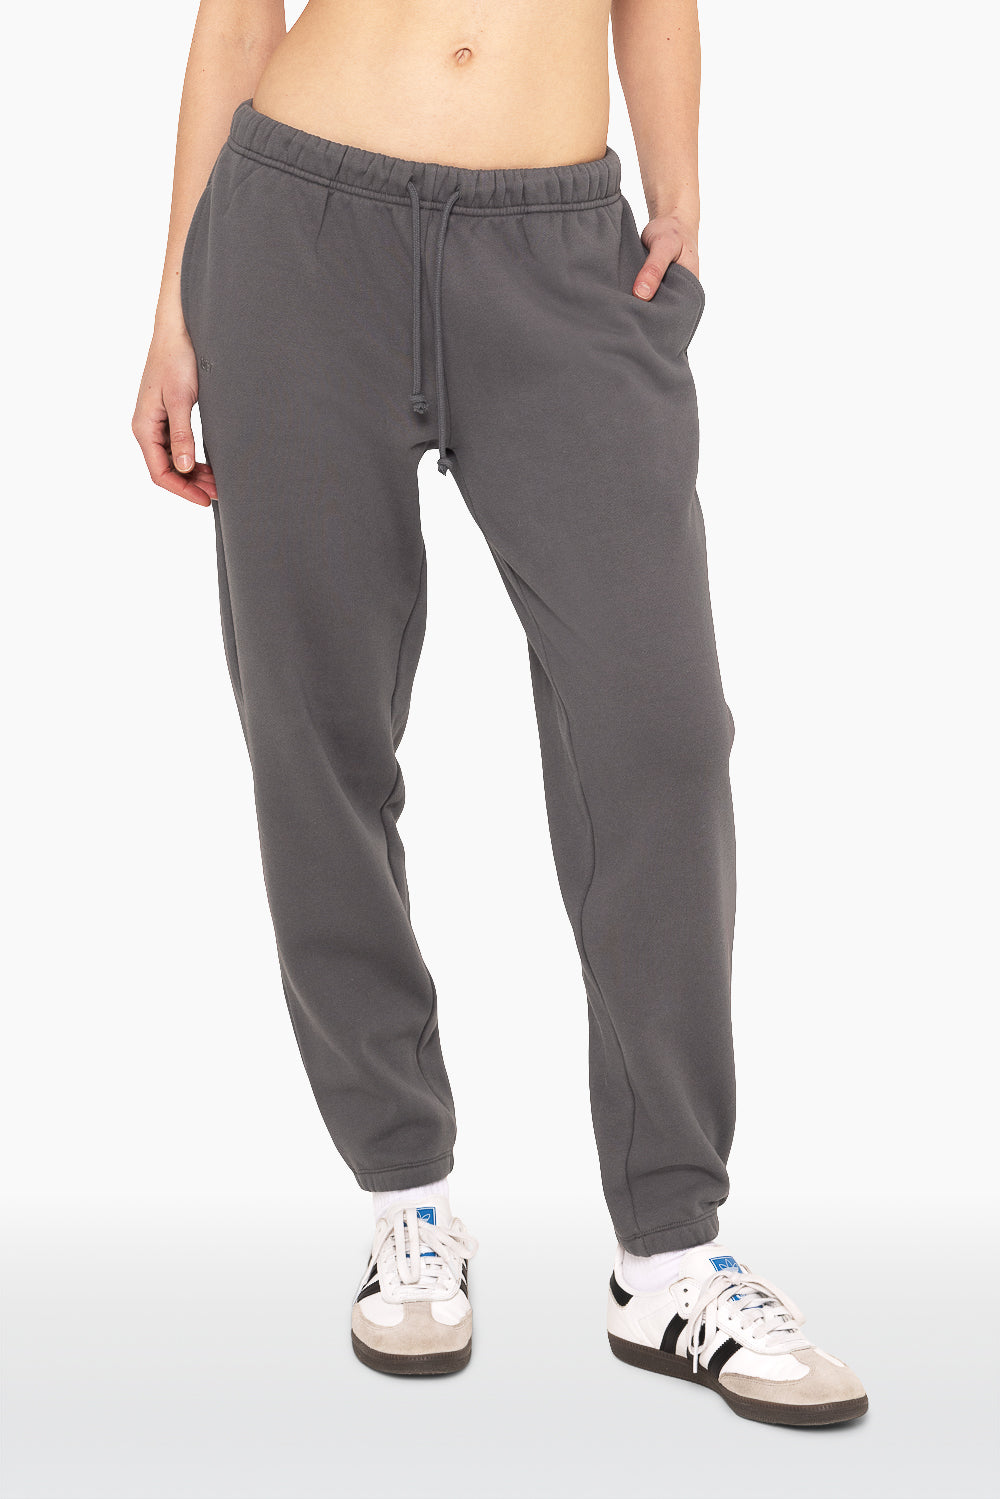 SET™ EMBROIDERED HEAVYWEIGHT SWEATS DRAWSTRING SWEATPANTS IN GRAPHITE